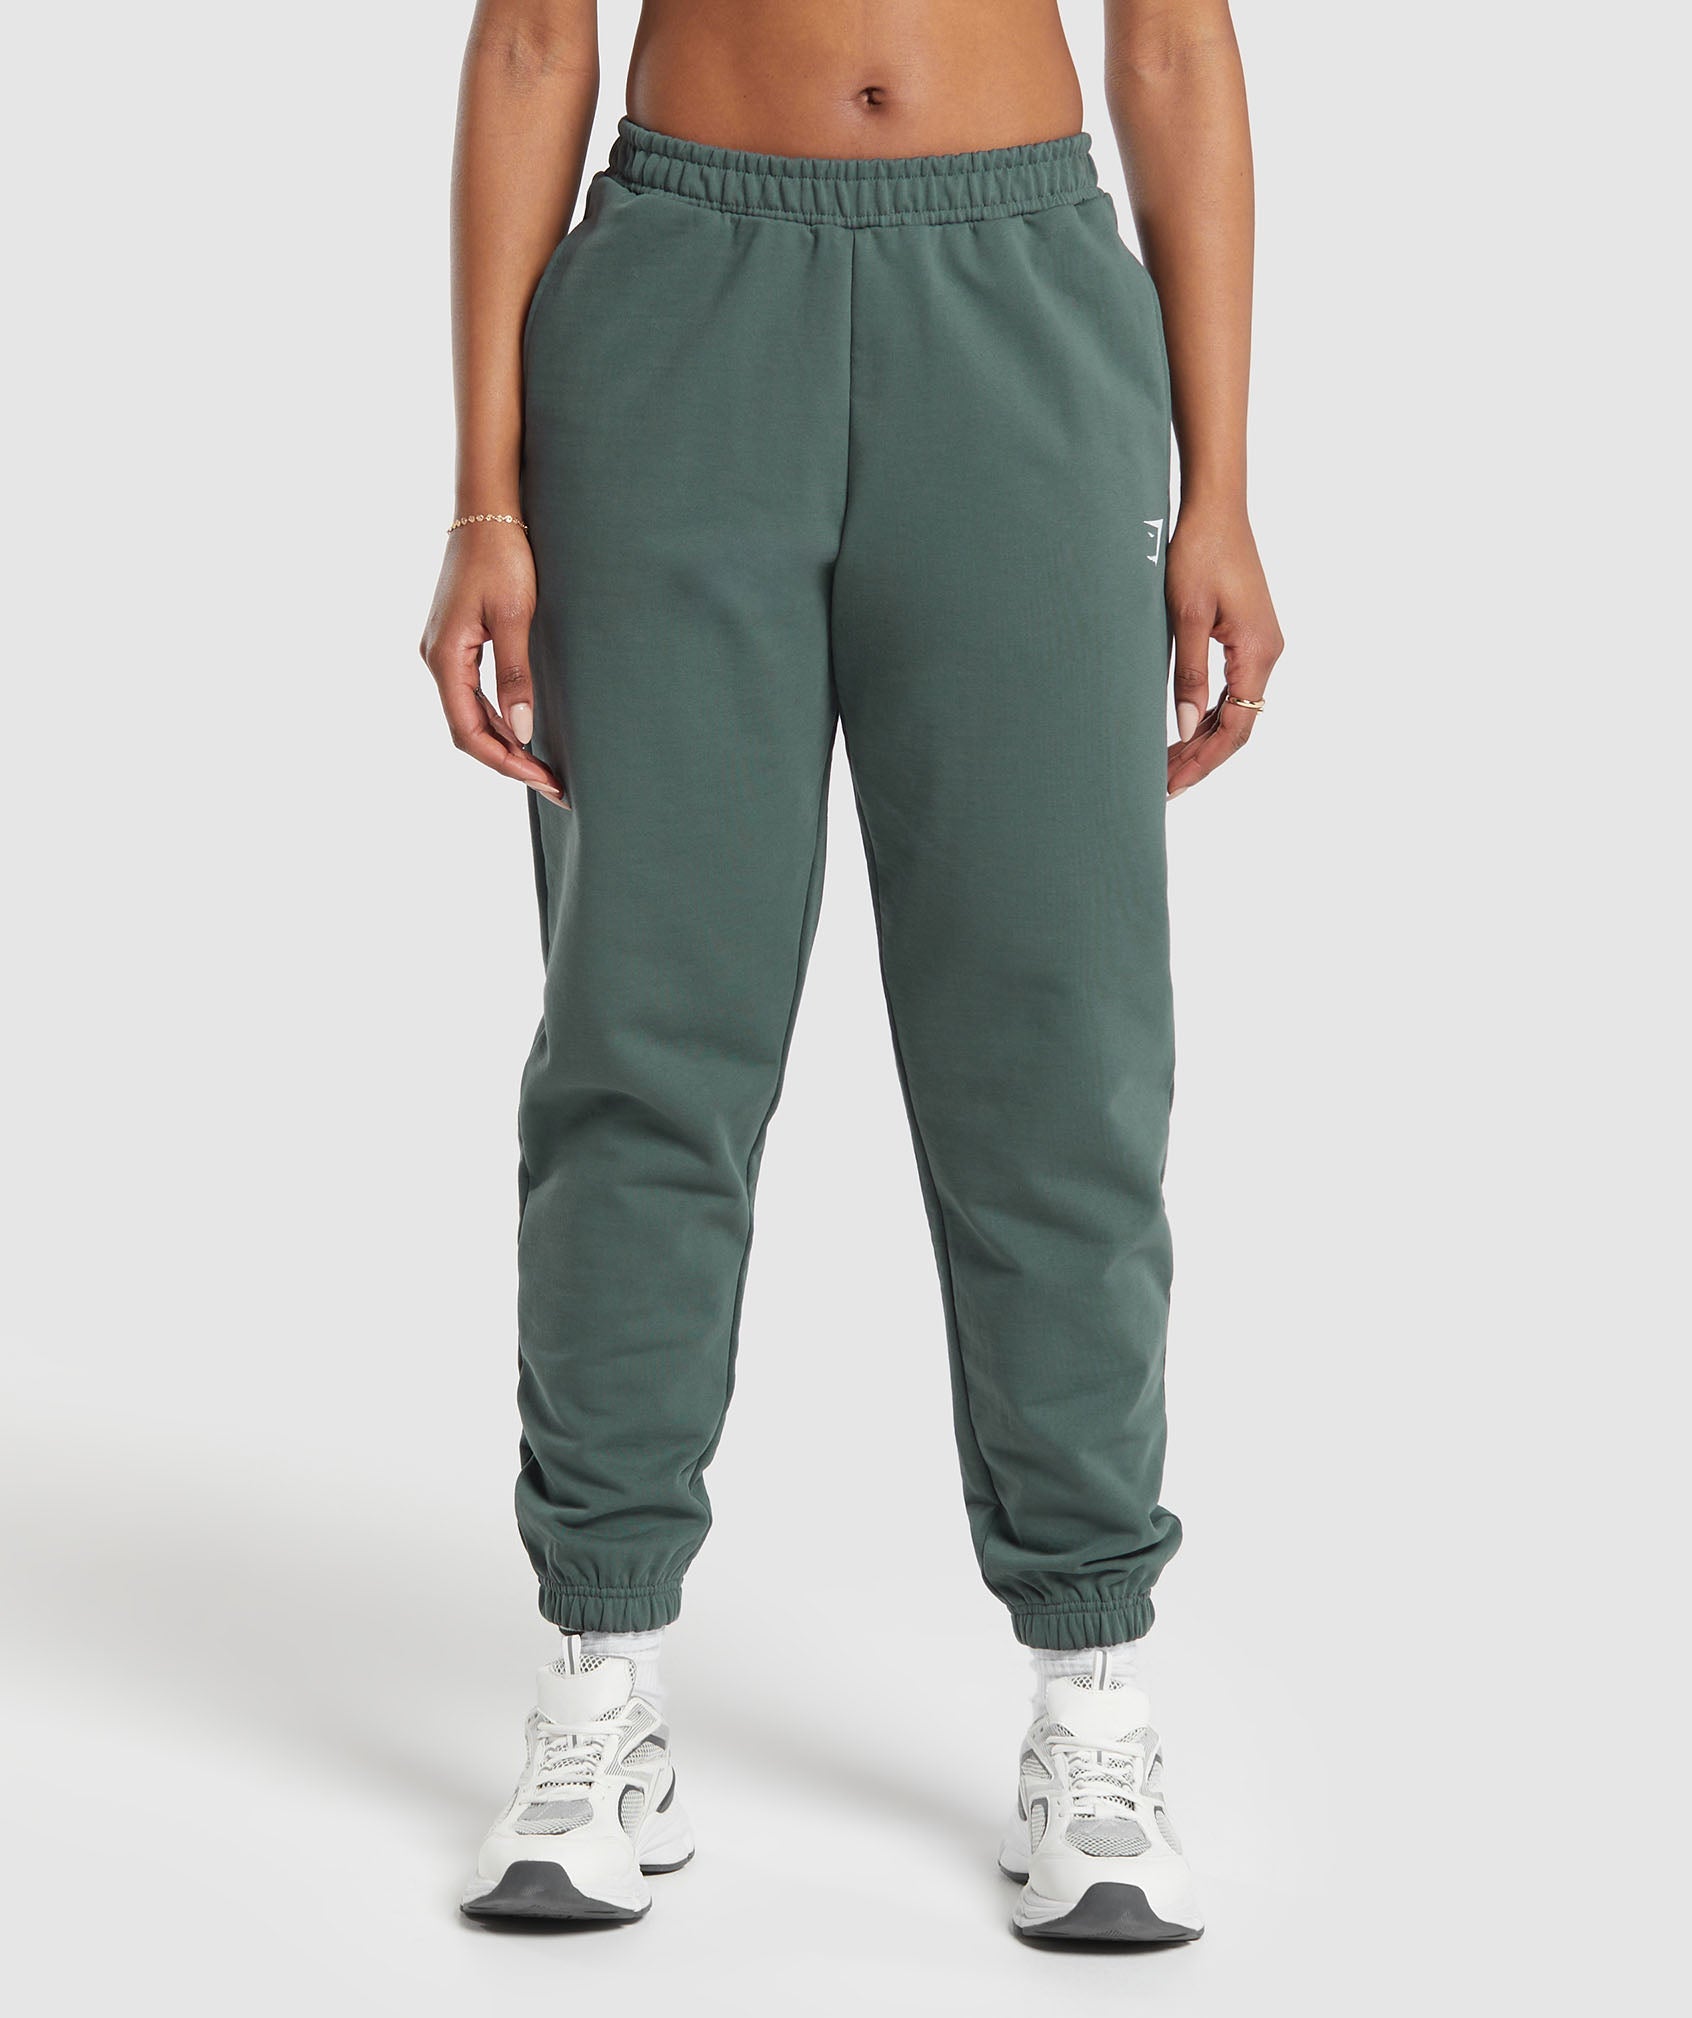 Tattoo Joggers in Slate Teal - view 2